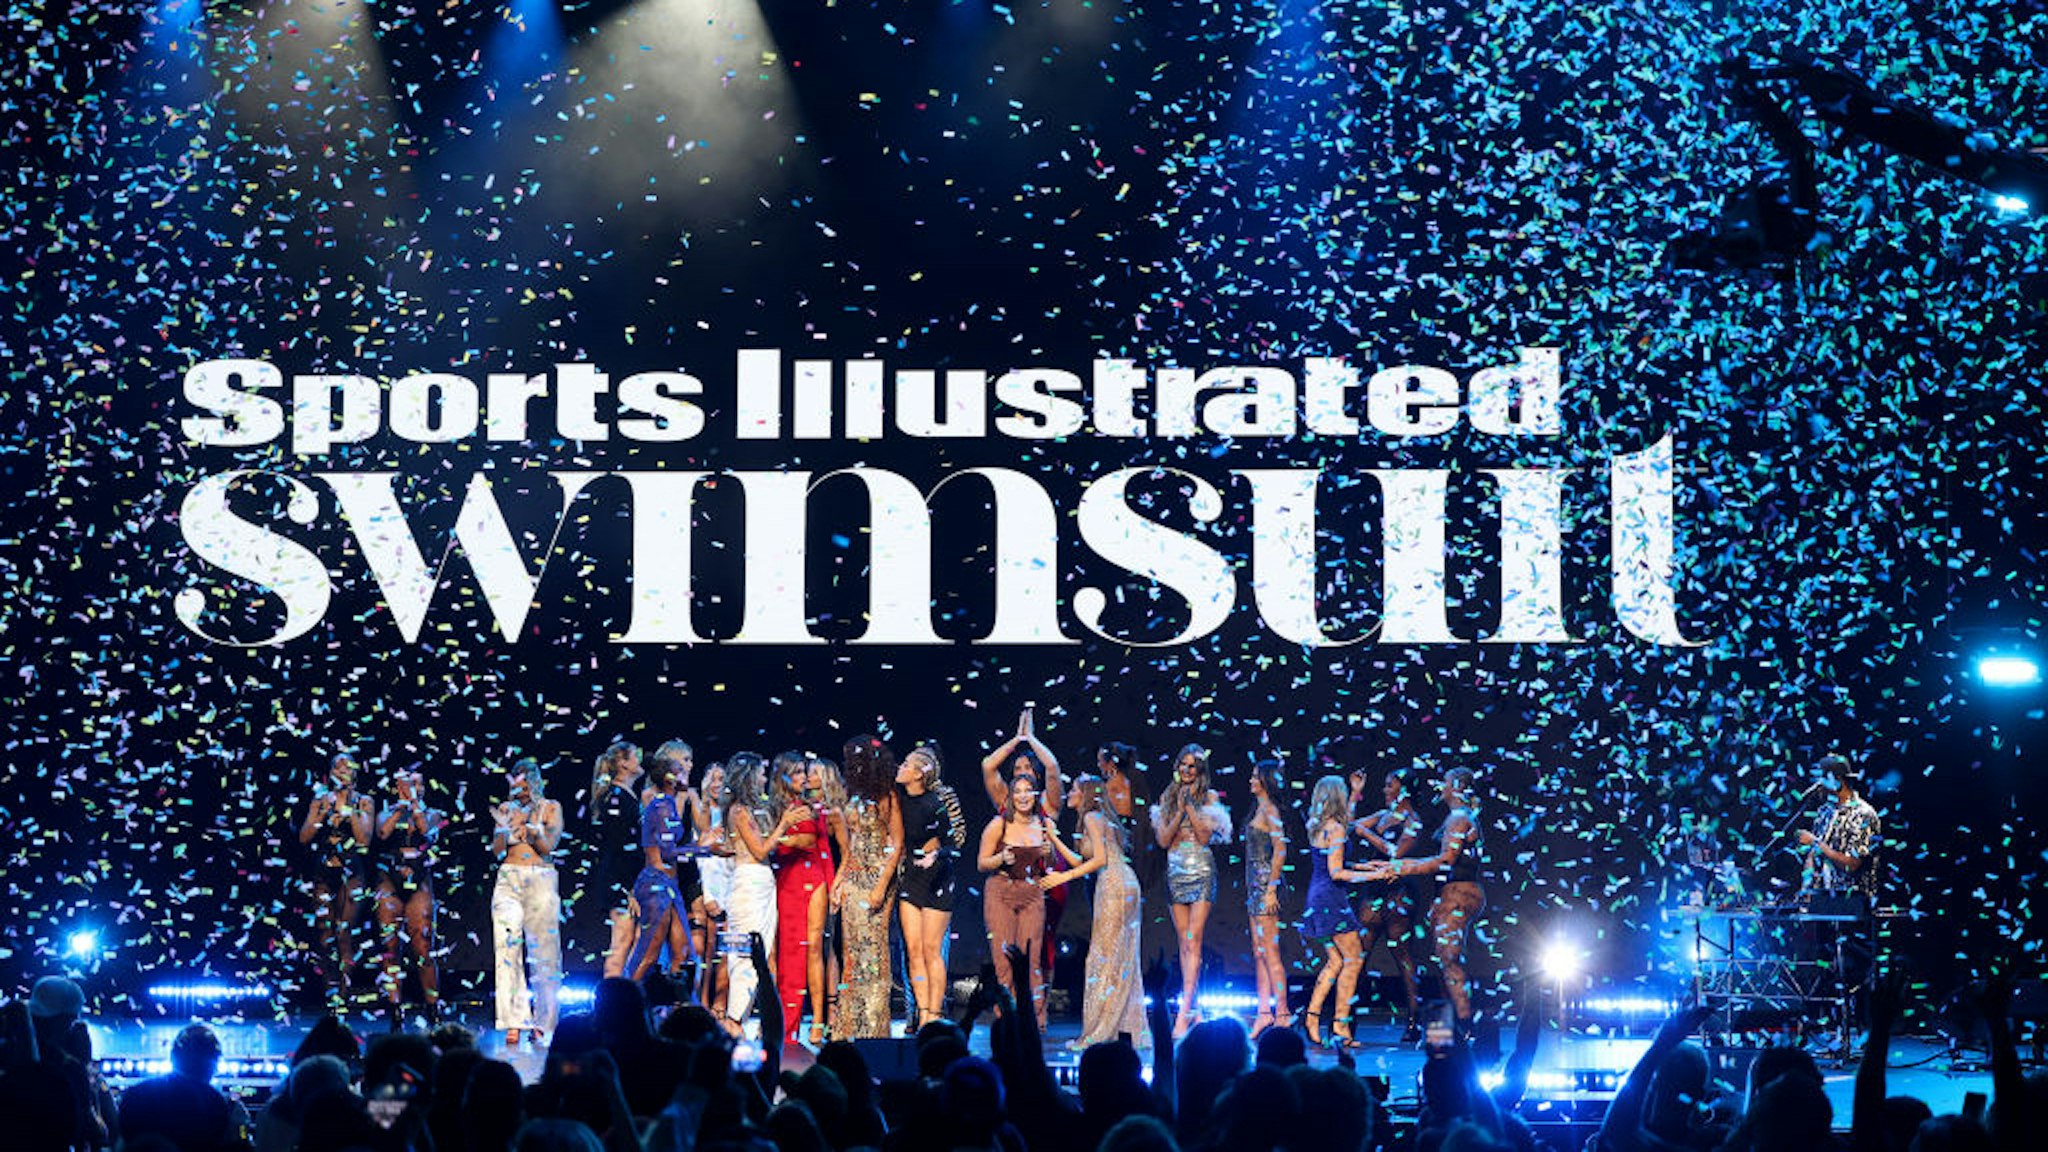 The Sports Illustrated Swimsuit 2021 Issue models speak onstage during the Sports Illustrated Swimsuit celebration of the launch of the 2021 Issue on July 24, 2021 in Hollywood, Florida.